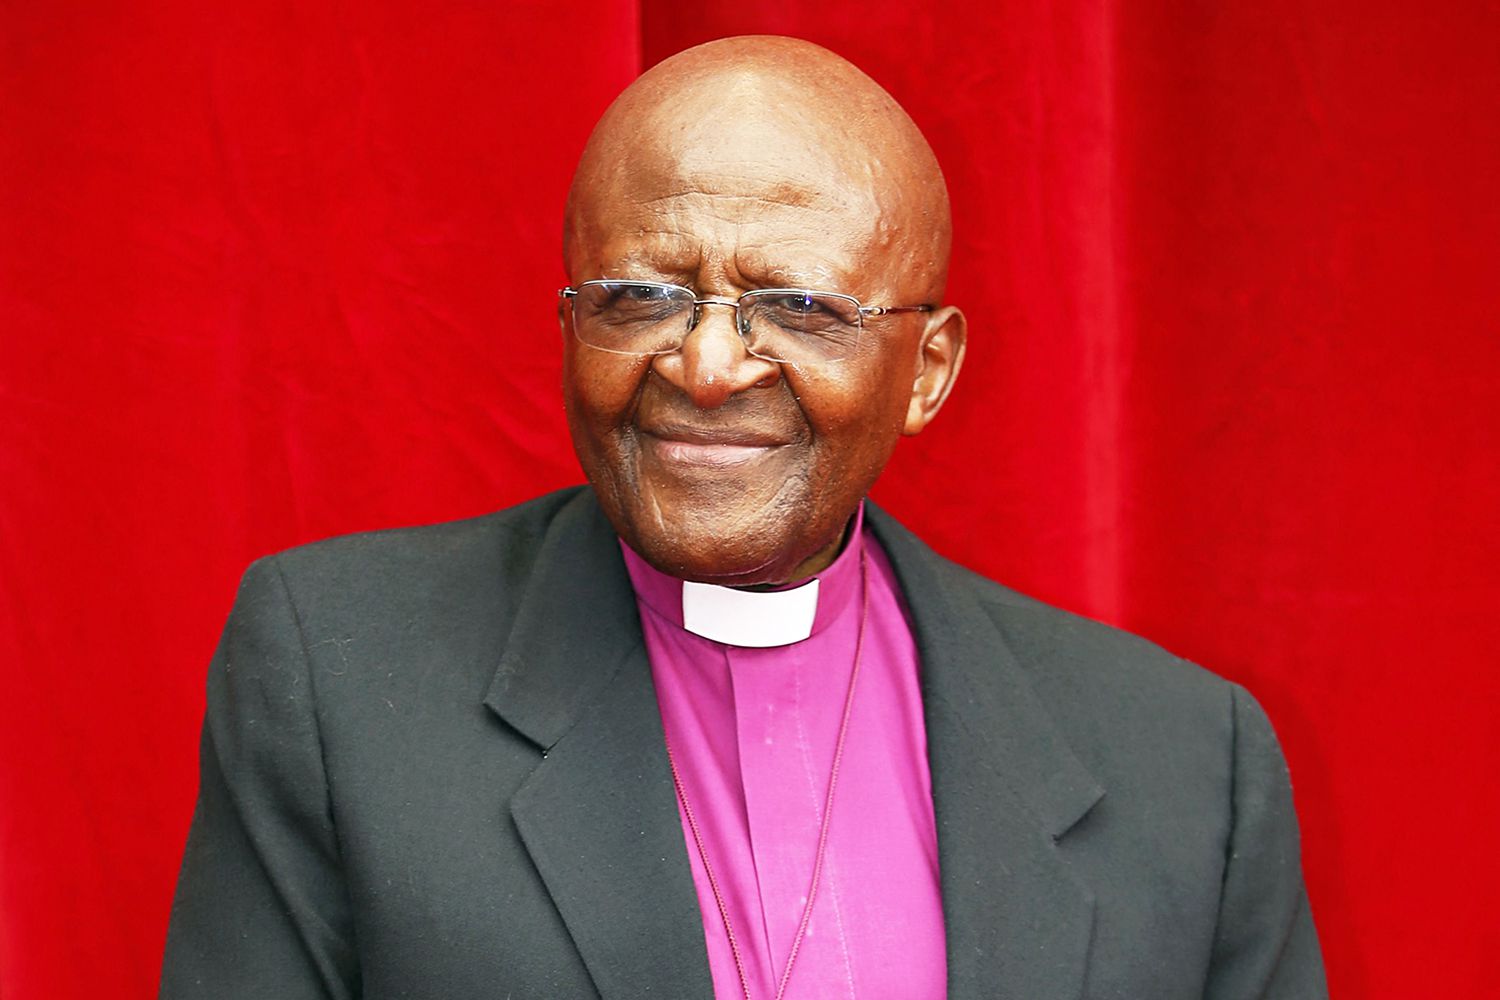 South African Archbishop and Nobel peace laureate Desmond Tutu poses as he arrives for a photocall for the documentary "Children of the Light" as part of the 54st Monte-Carlo Television Festival on June 8, 2014 in Monaco.